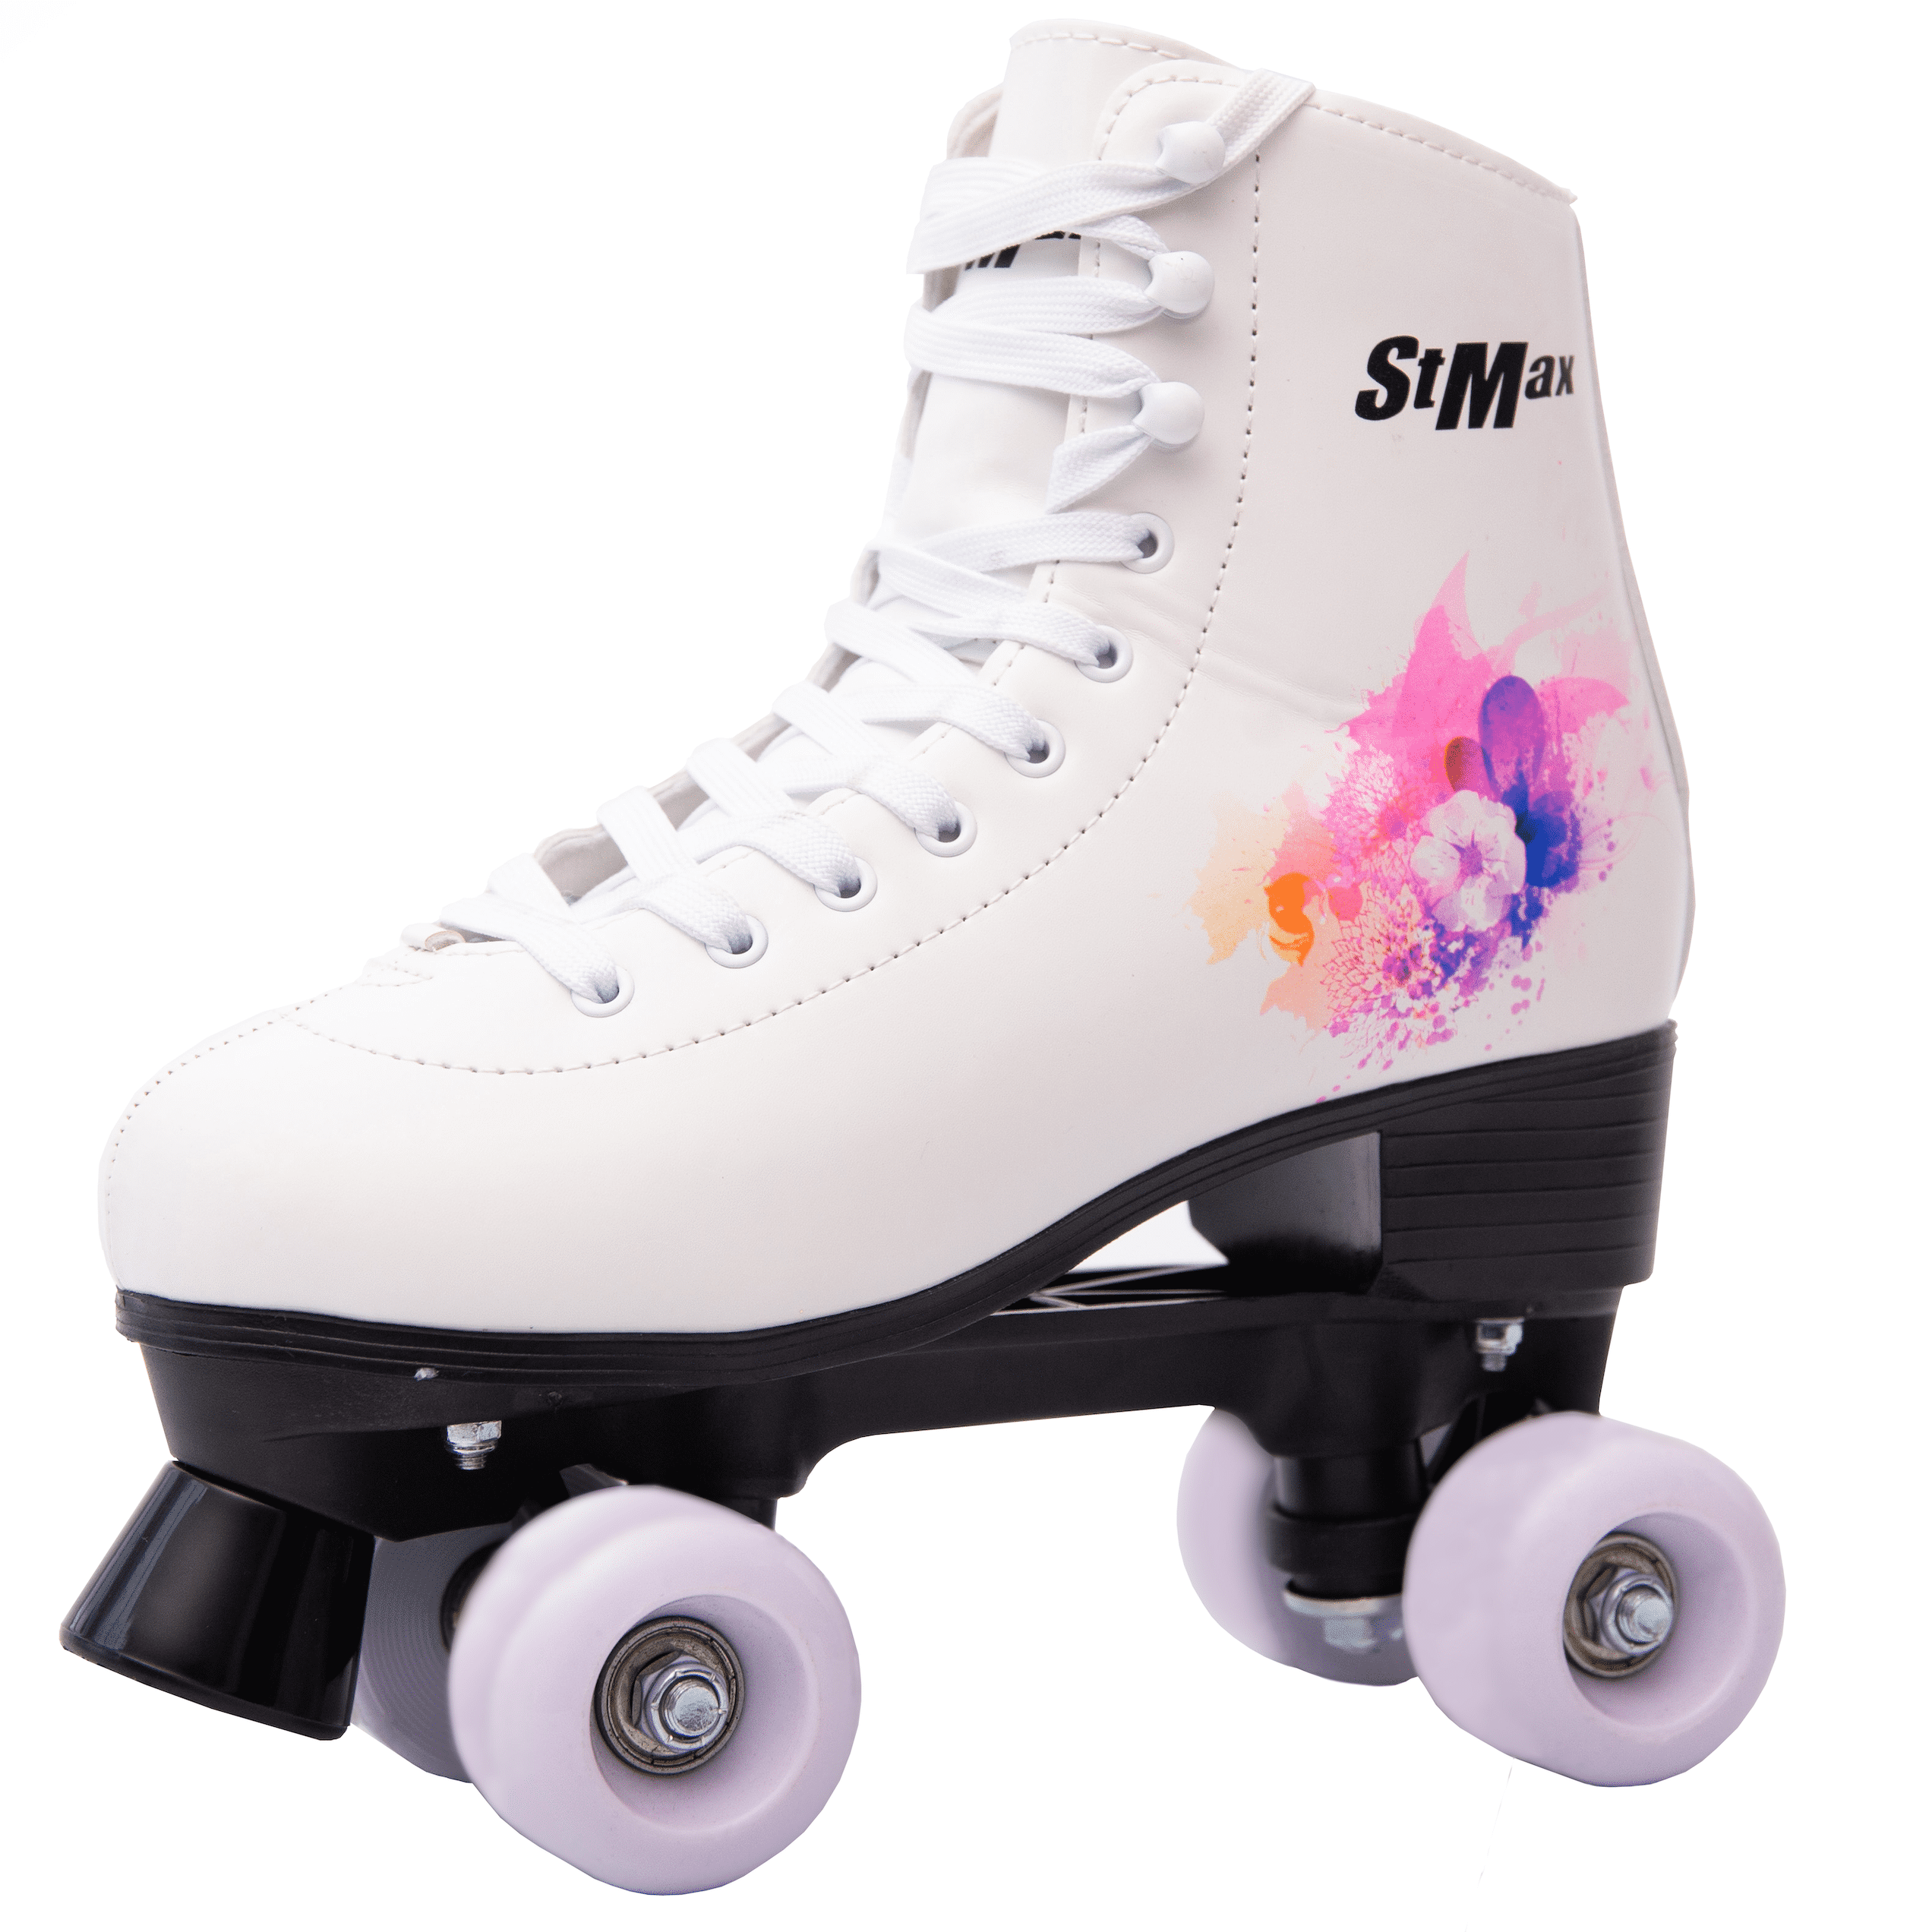 Gets Womens Roller Skates Four-Wheel Roller Skates for Adult Green Classic High-top Roller Skates Girls with Portable Shoes Bag Boys 